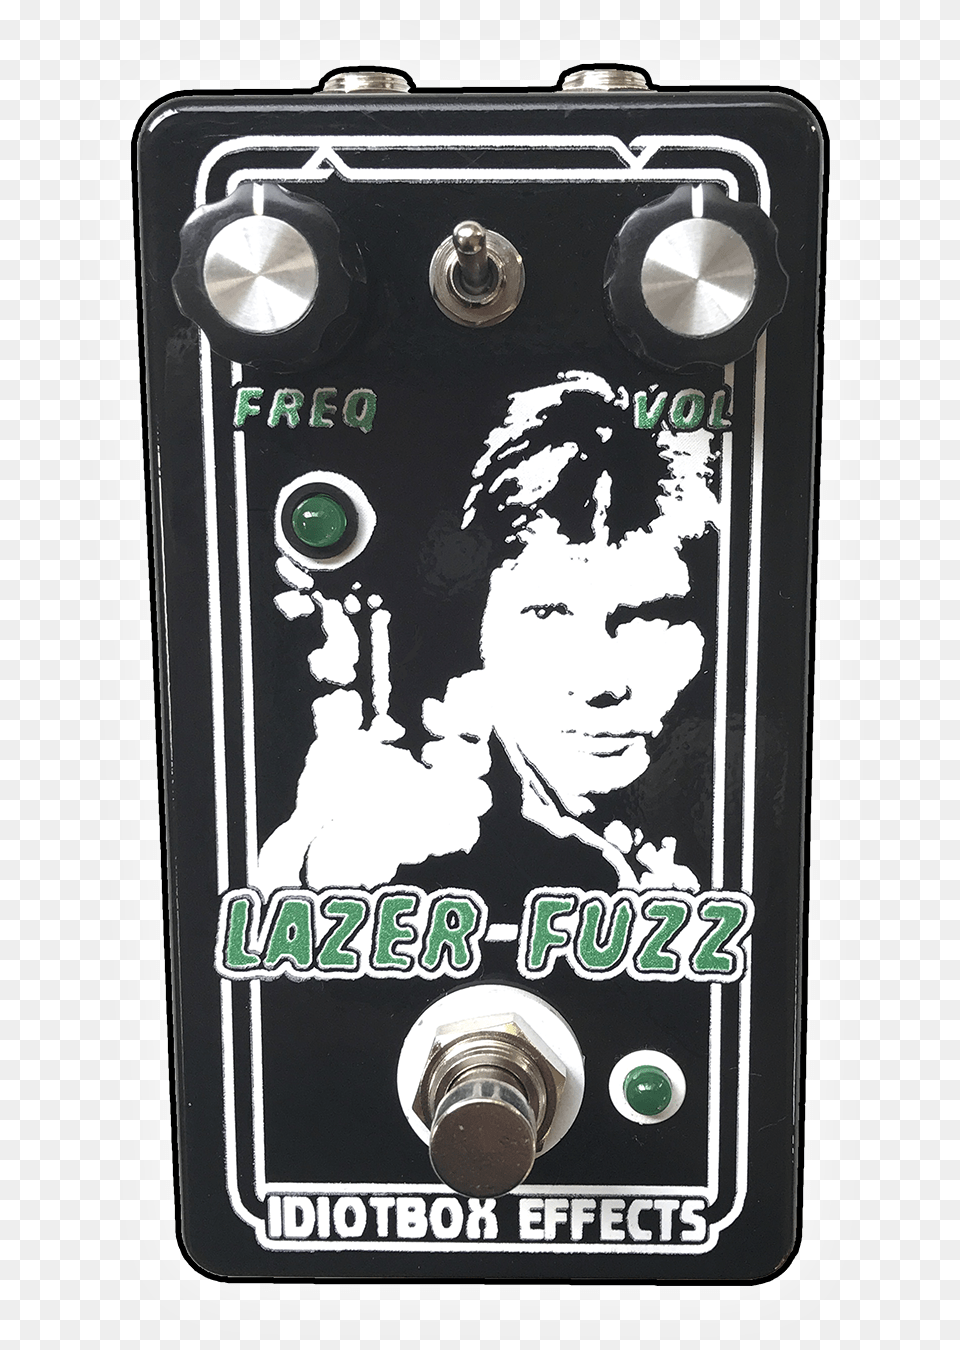 Of Lazer Fuzz Idiotbox Effects Lazer Fuzz, Electrical Device, Switch, Baby, Face Png Image